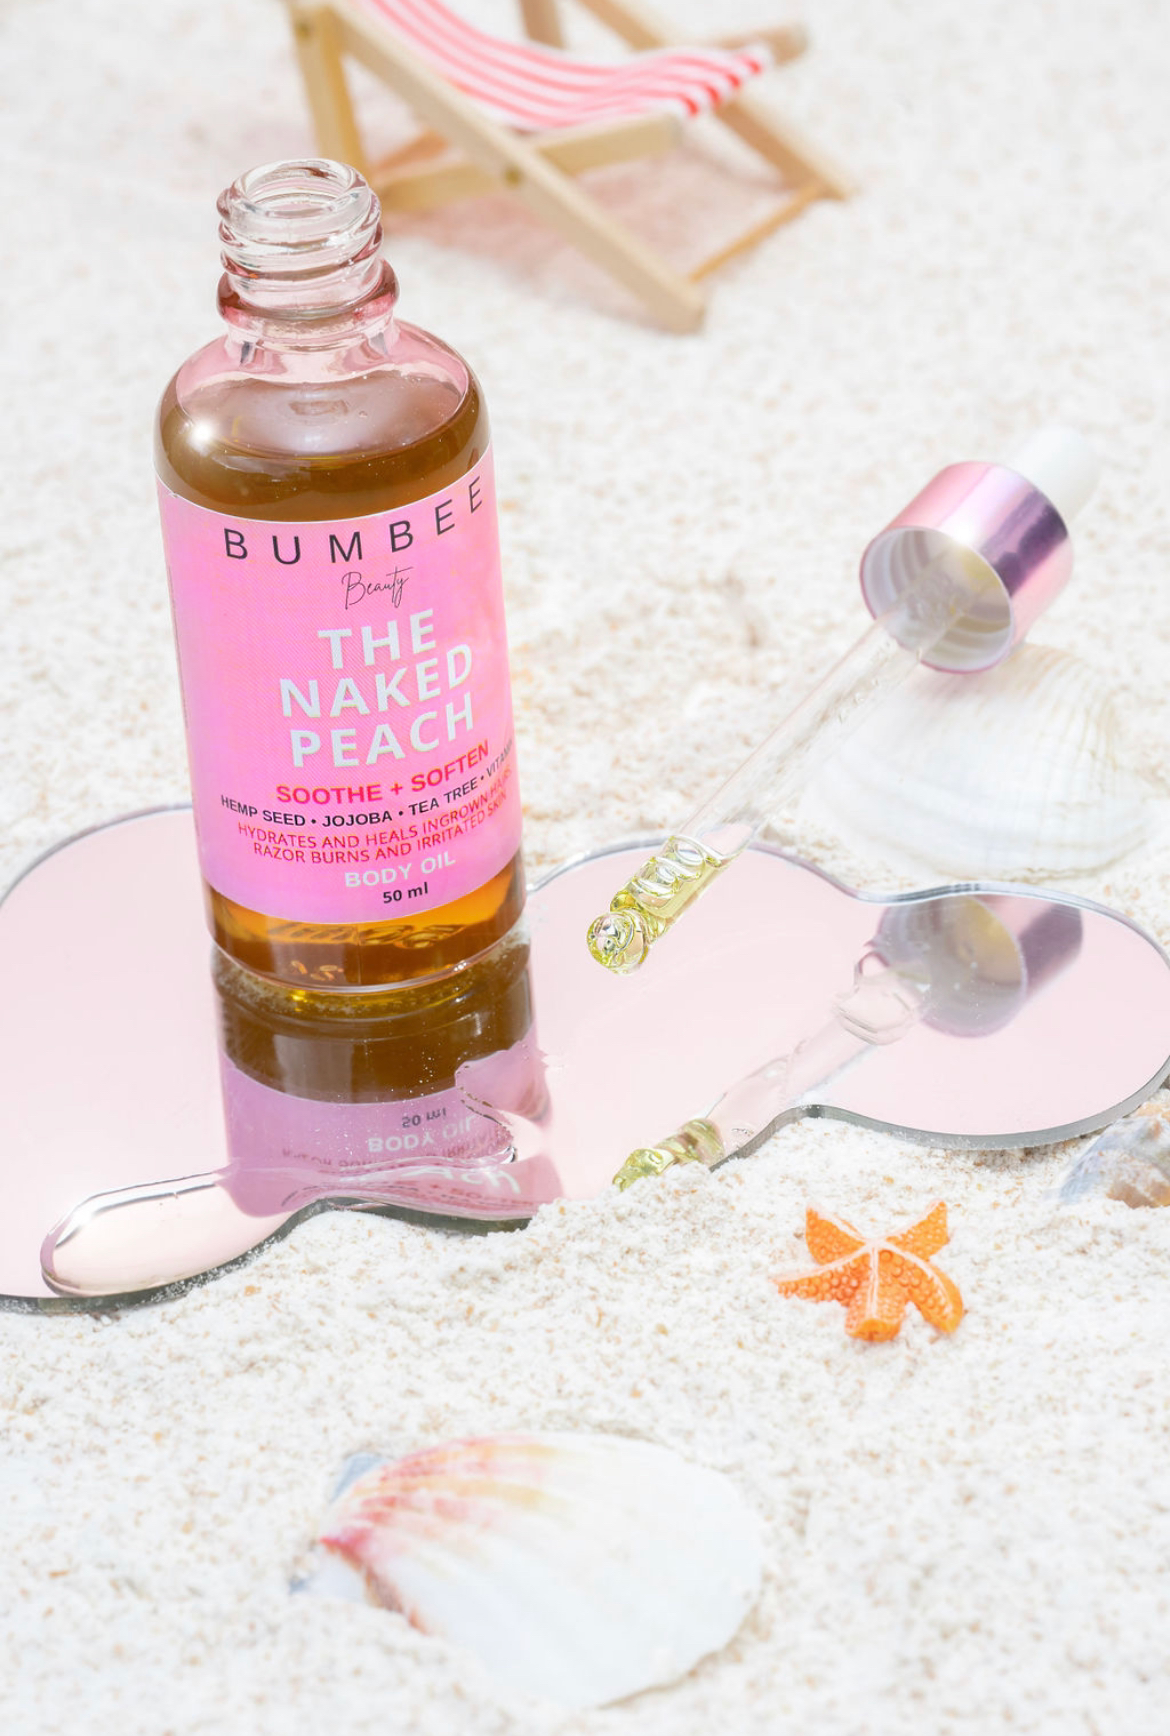 Naked Peach body oil placed on a sandy beach setting, showcasing its ability to alleviate razor burn on the bikini line. The image evokes a sense of confidence in wearing a swimsuit, with the product promising smoother and irritation-free skin for a comfortable beach experience